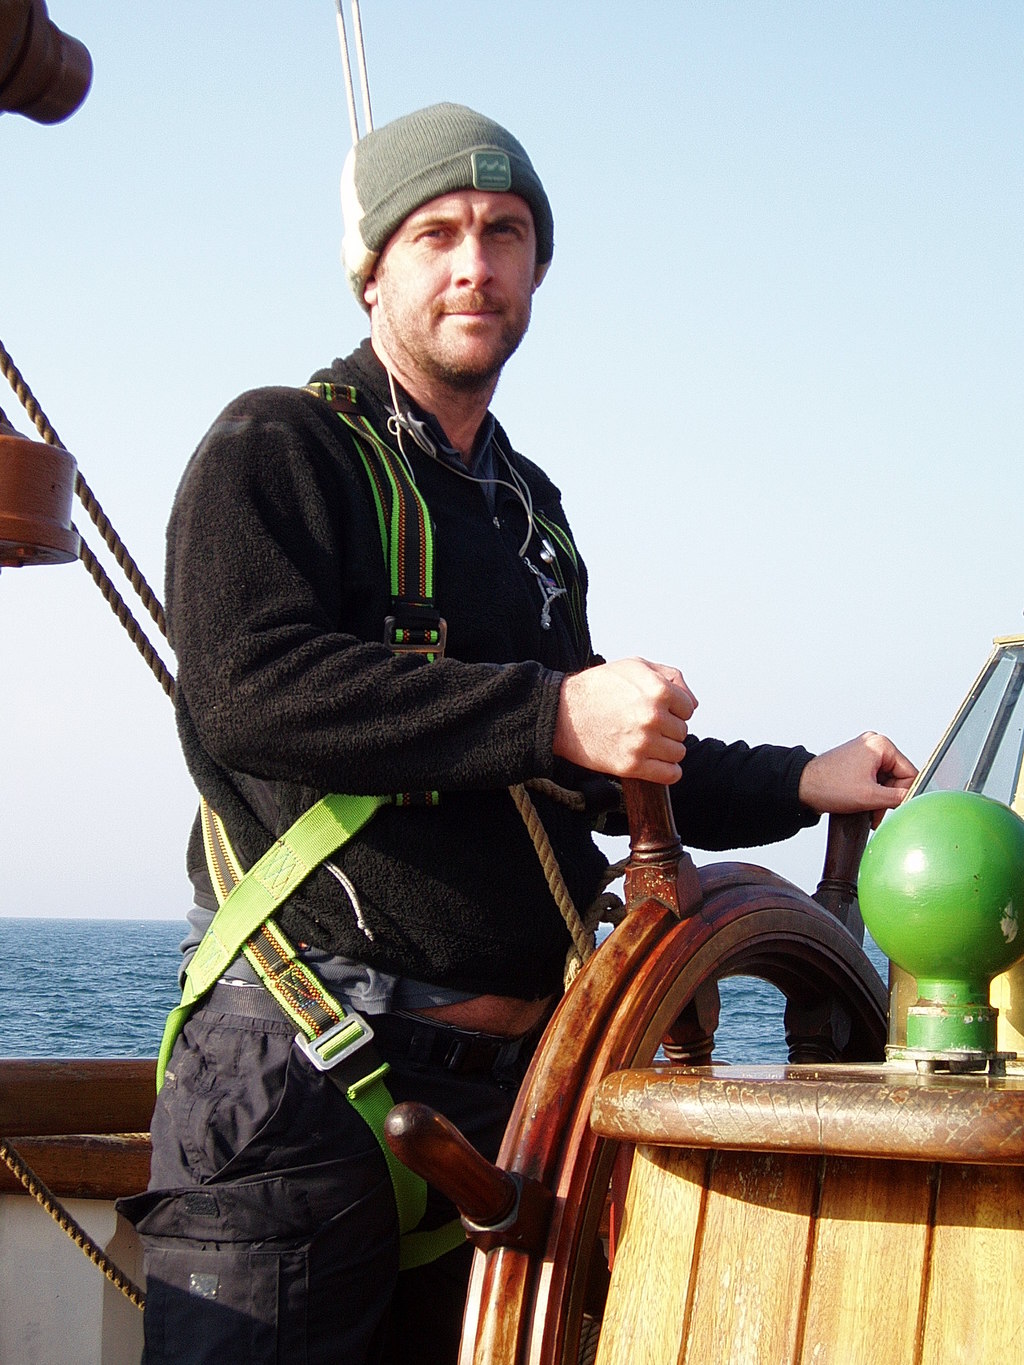 Myself at the helm.